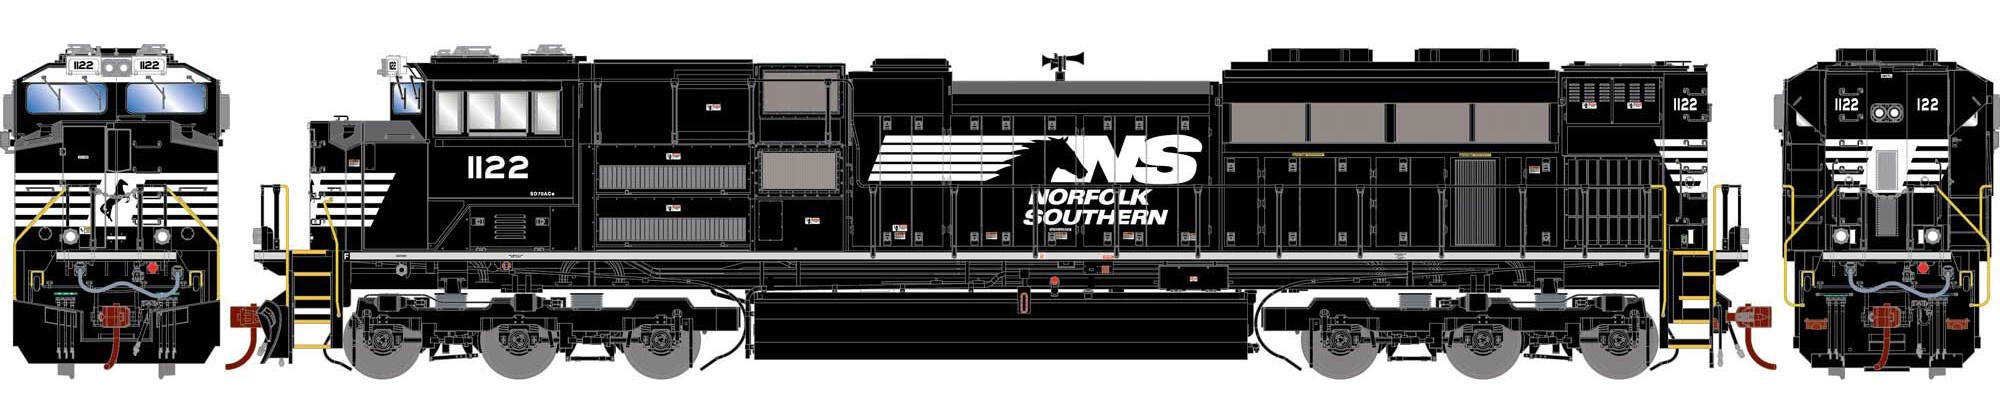 Athearn Genesis HO ATHG75839 DCC/Tsunami 2 Sound Equipped EMD SD70ACe Locomotive Norfolk Southern NS #1122